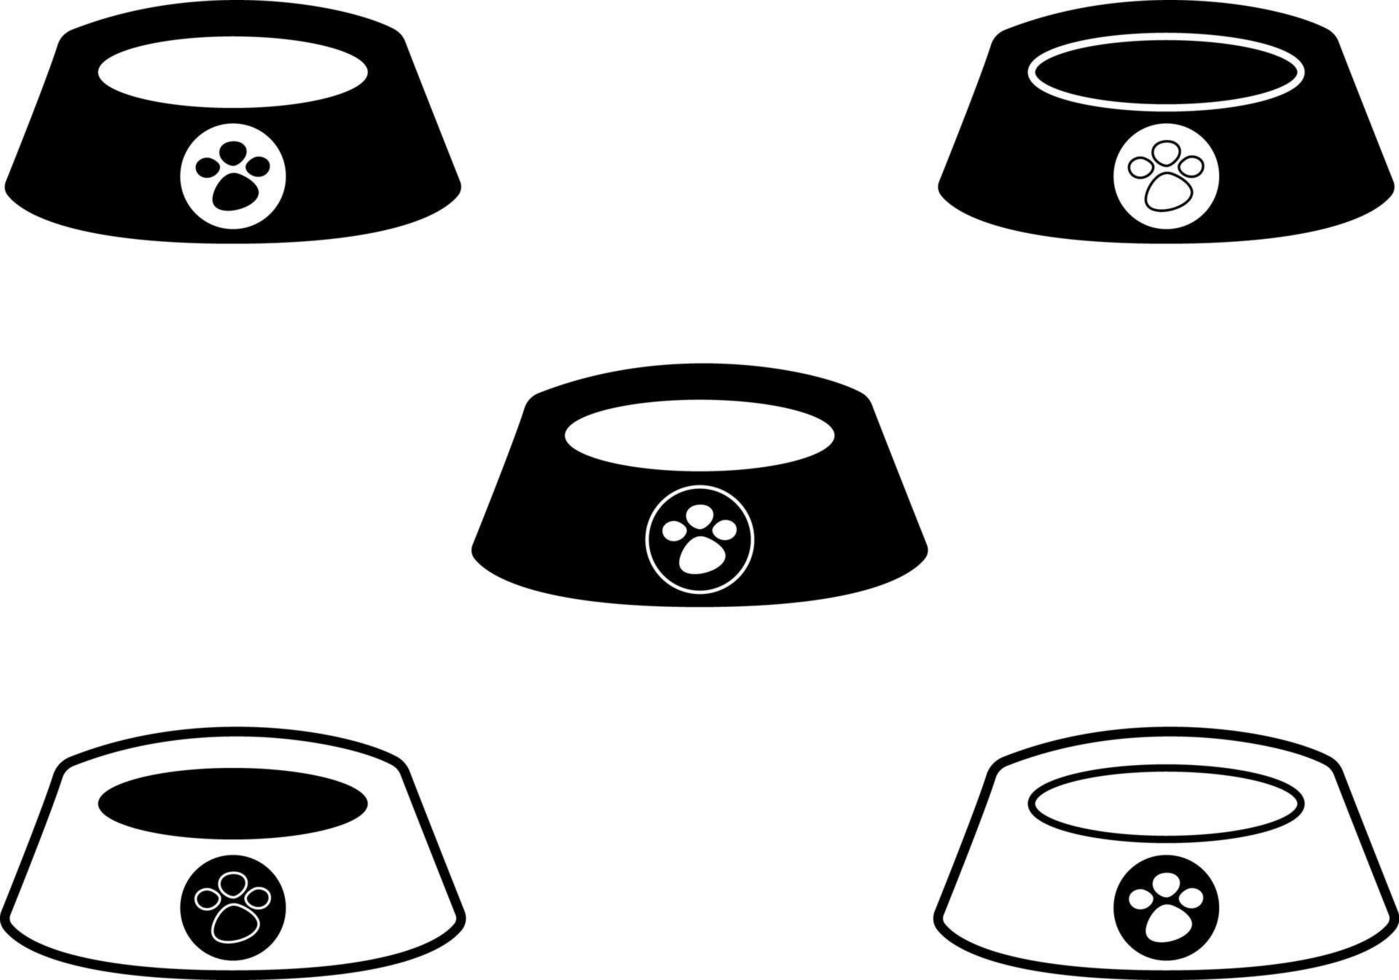 dog feed bowl. vector pet plates. black and white icons. simple design. illustration